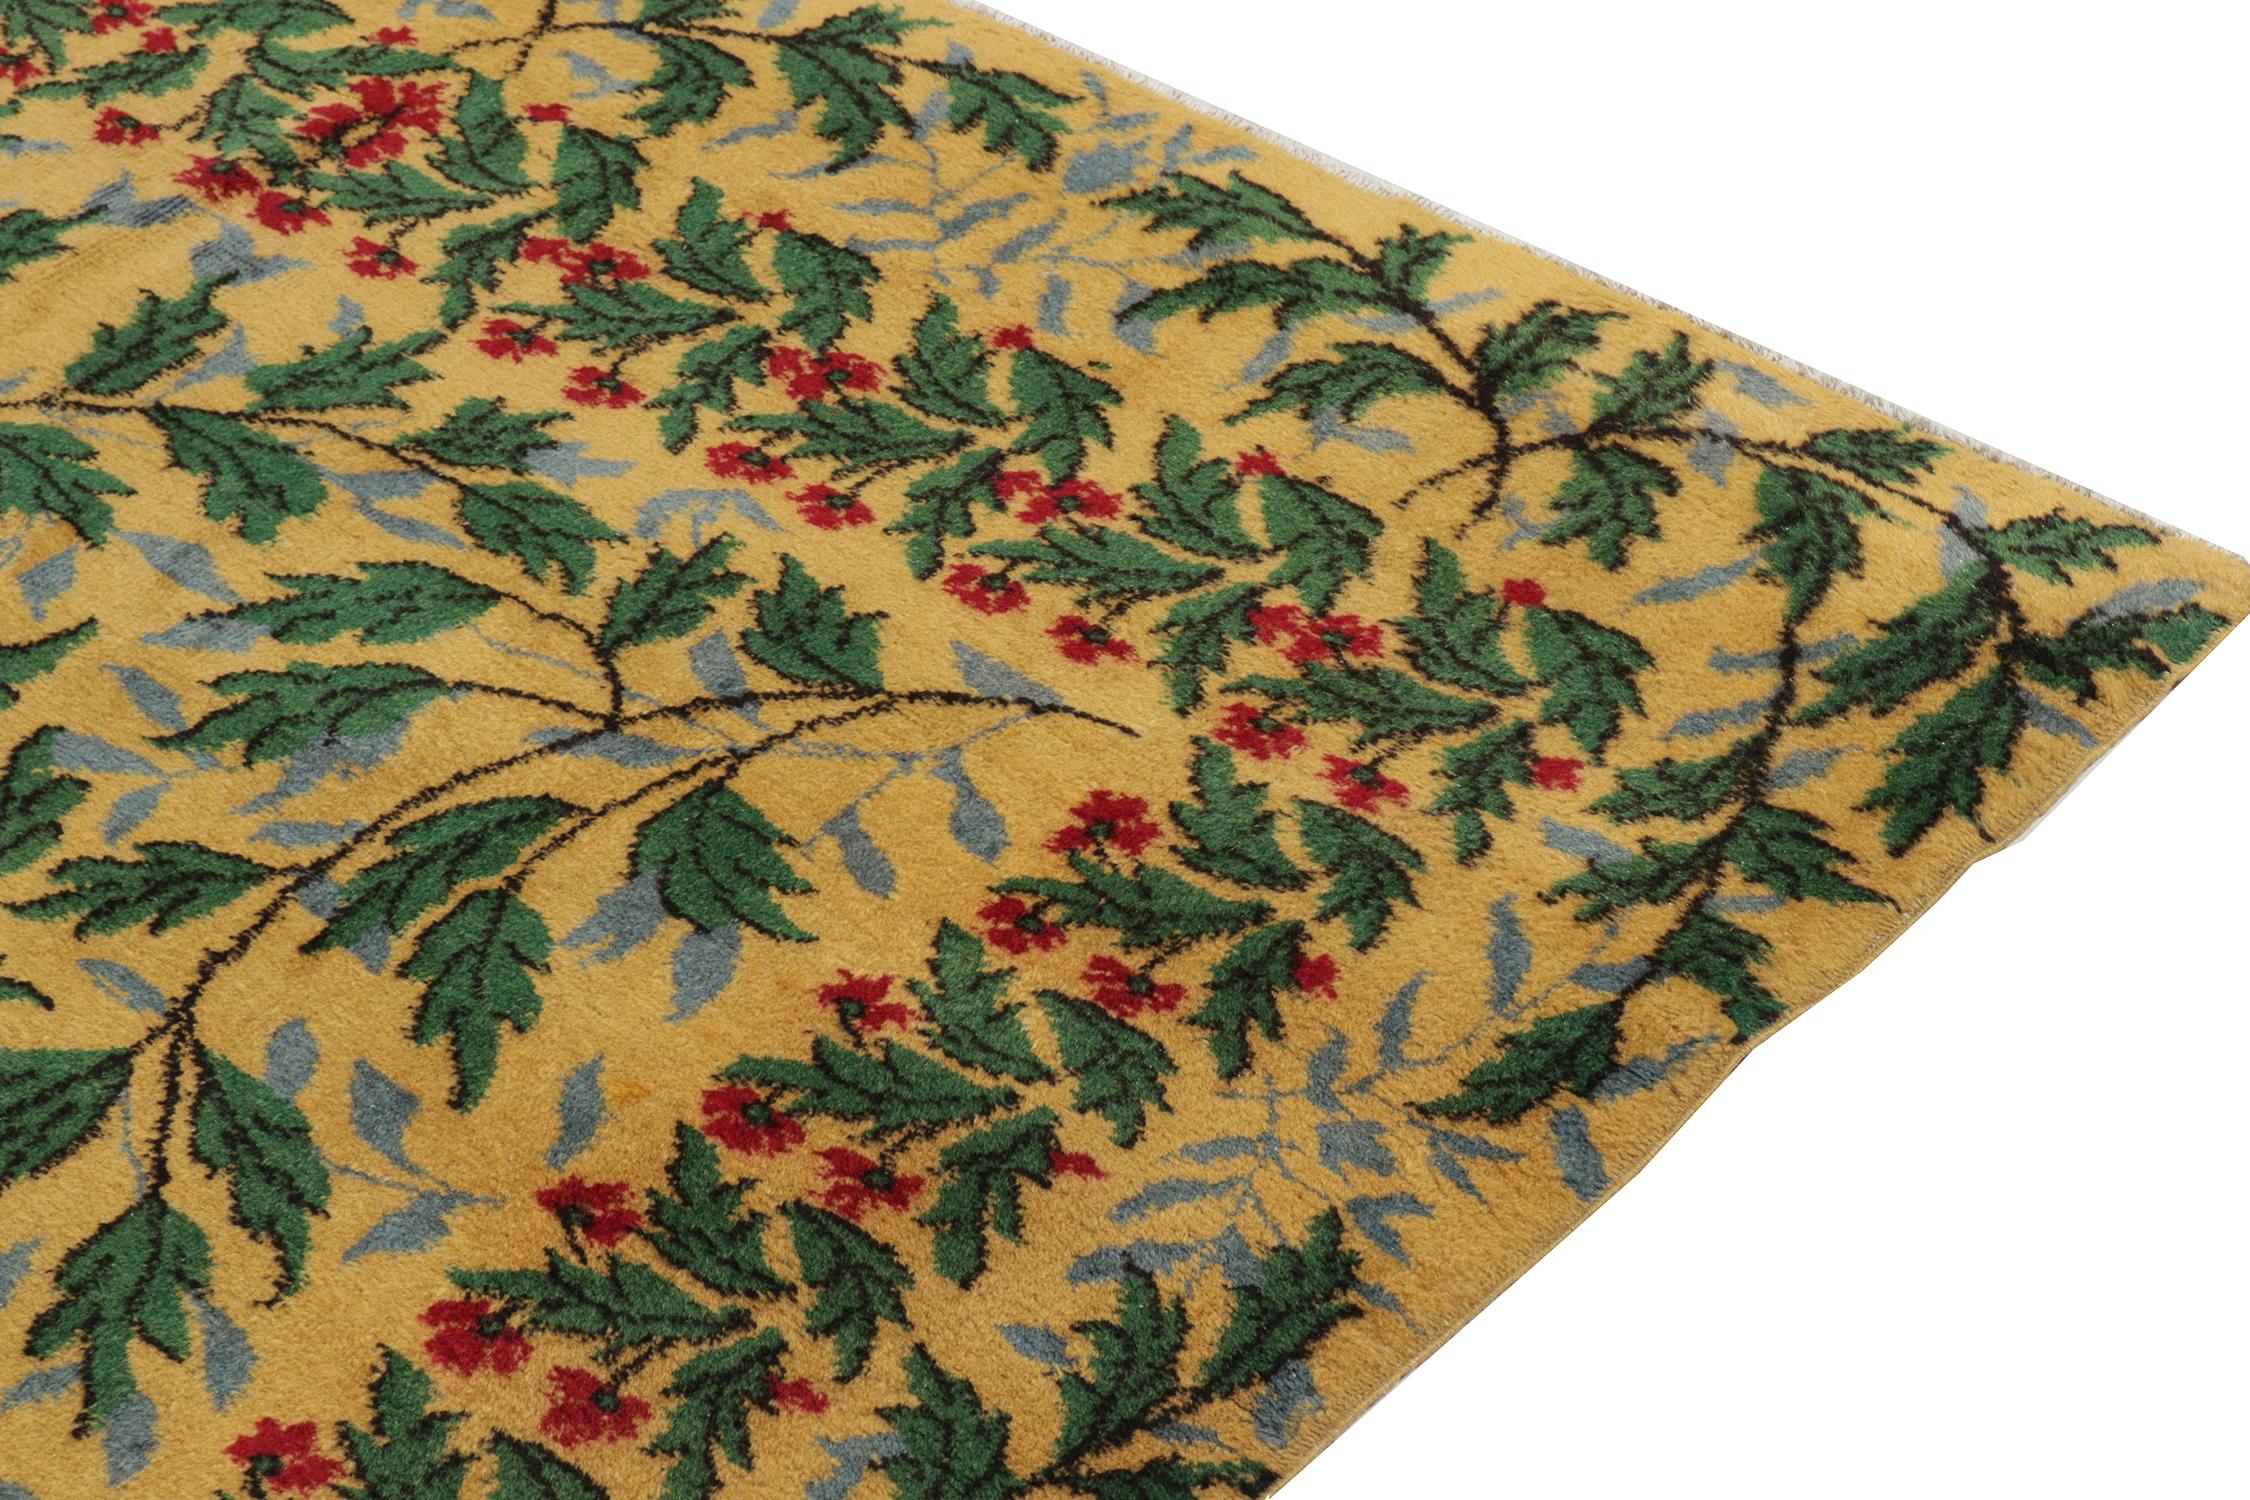 Indian 1960s Vintage Nouveau Style Rug in Gold, Green Floral Patterns by Rug & Kilim For Sale